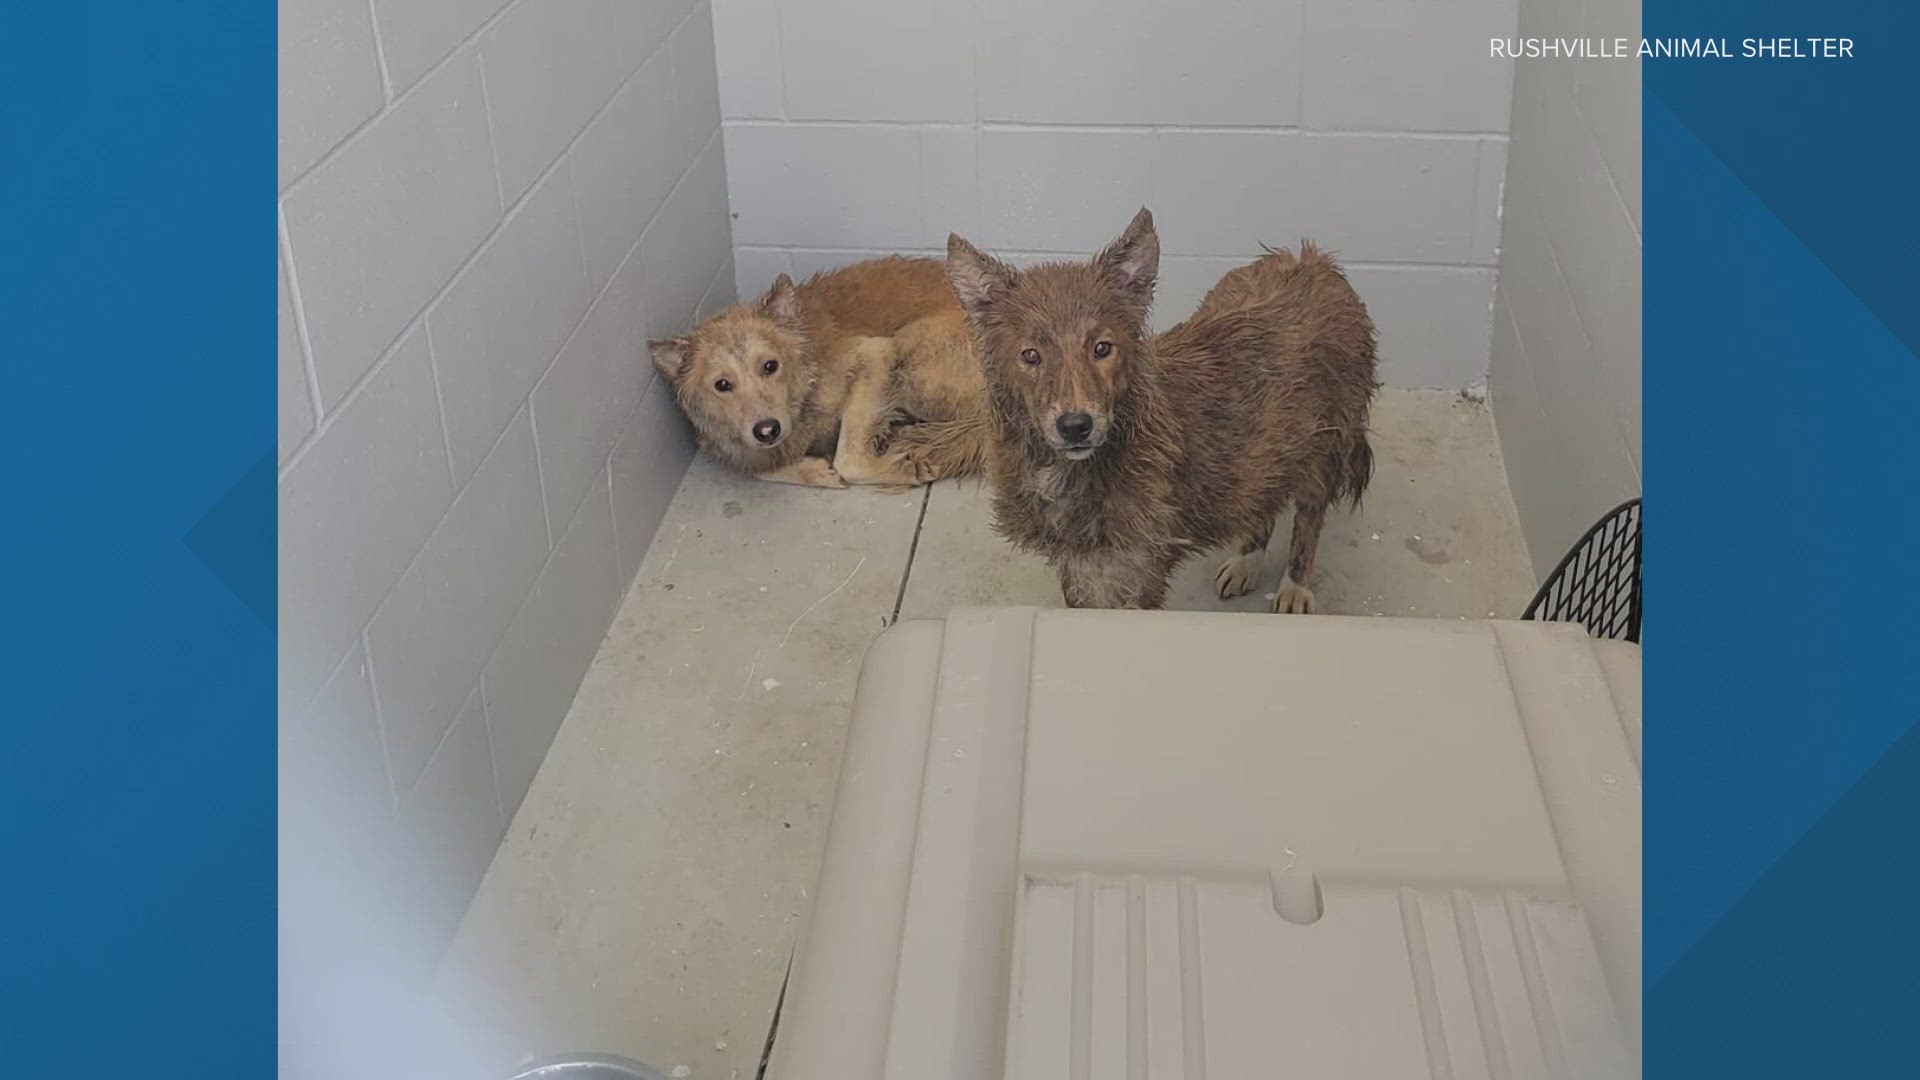 Animal control workers are working to get the abandoned dogs into rescues.